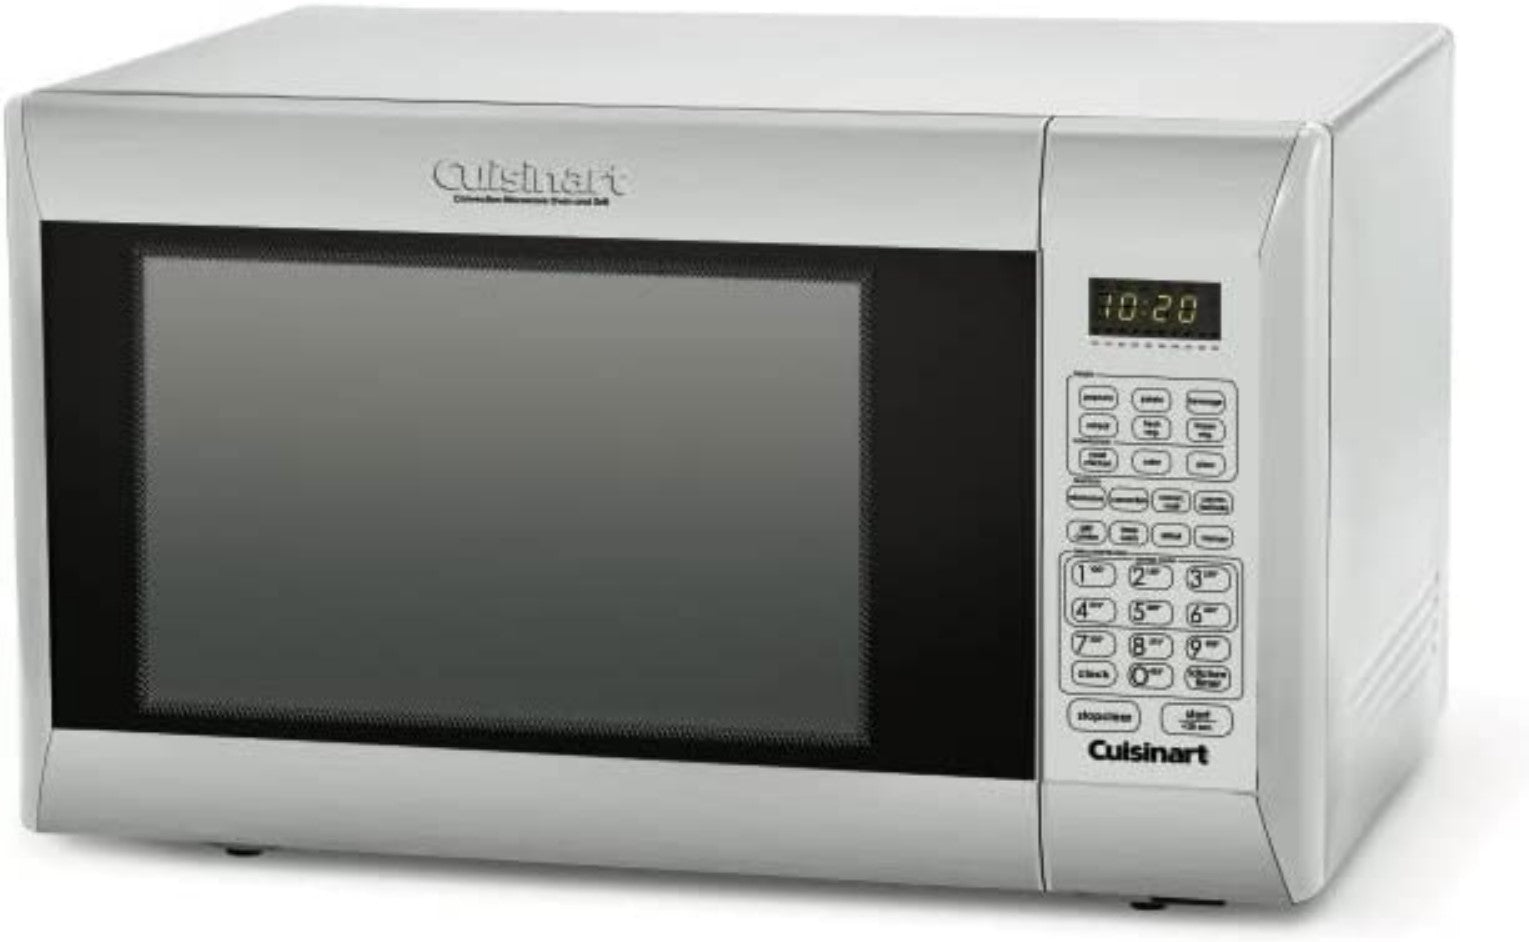 Cuisinart CMW-200FR 1.2 Cubic Foot Convection Microwave Oven - Certified Refurbished